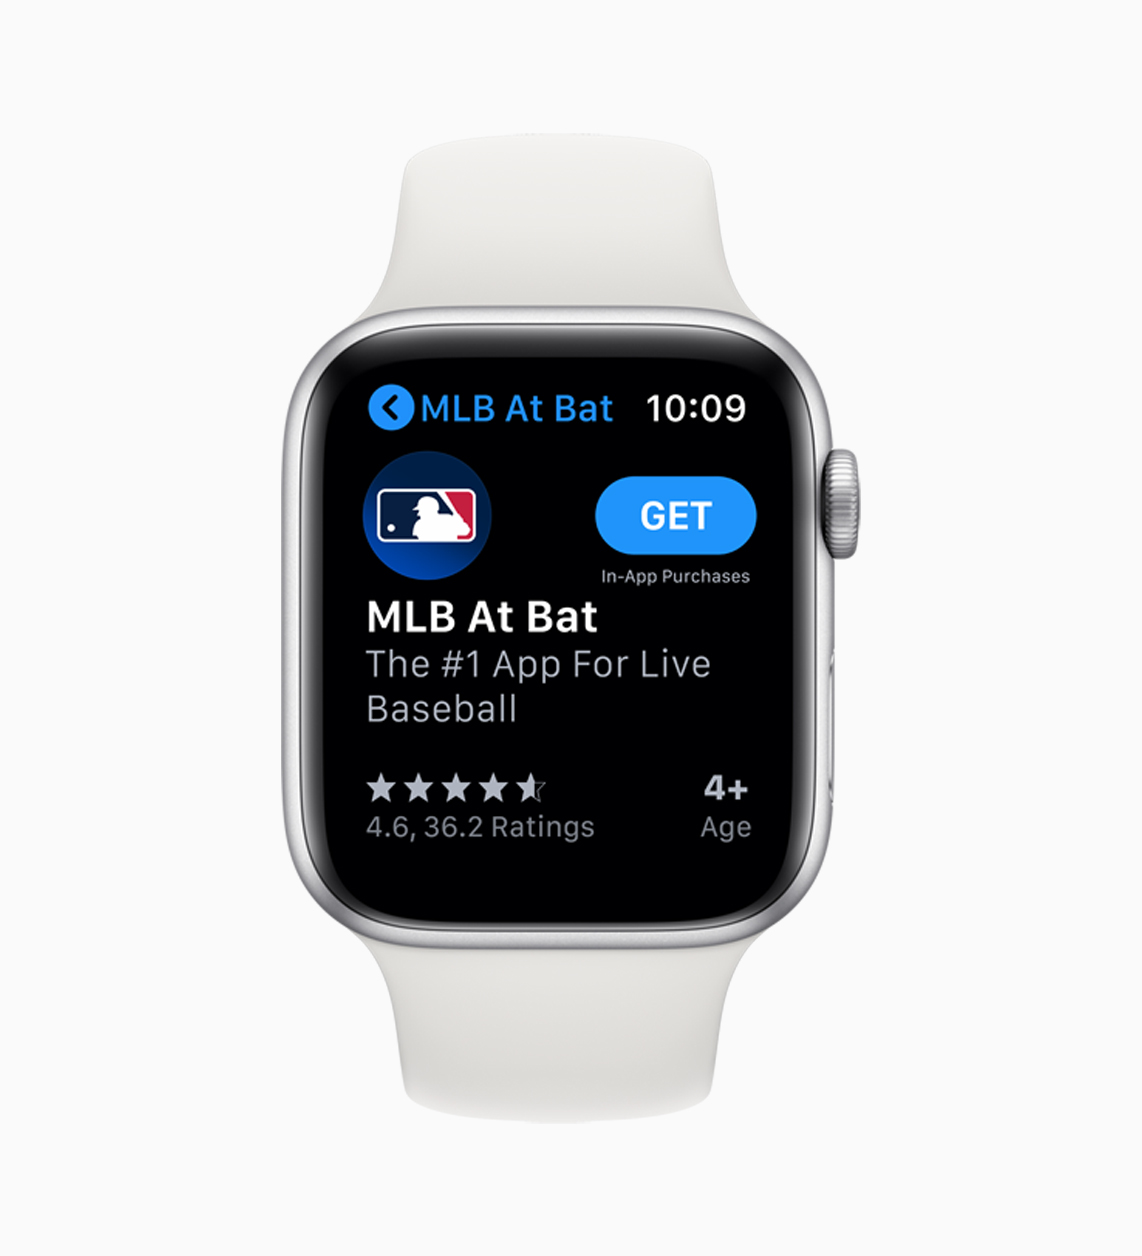 watchOS 6 Adds New Health and Fitness Capabilities, More for Apple Watch